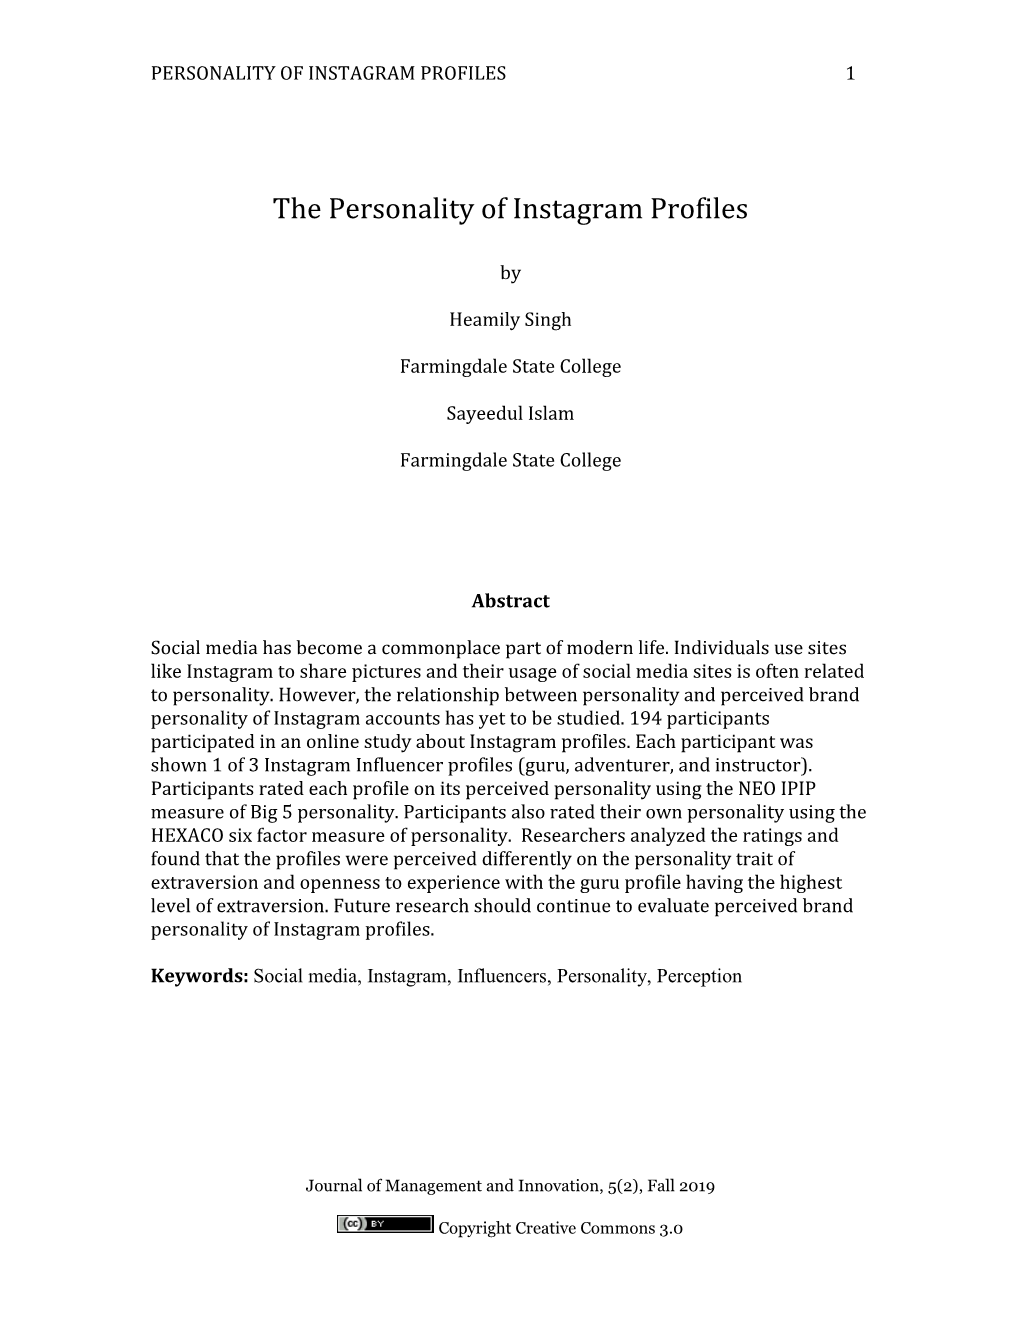 The Personality of Instagram Profiles